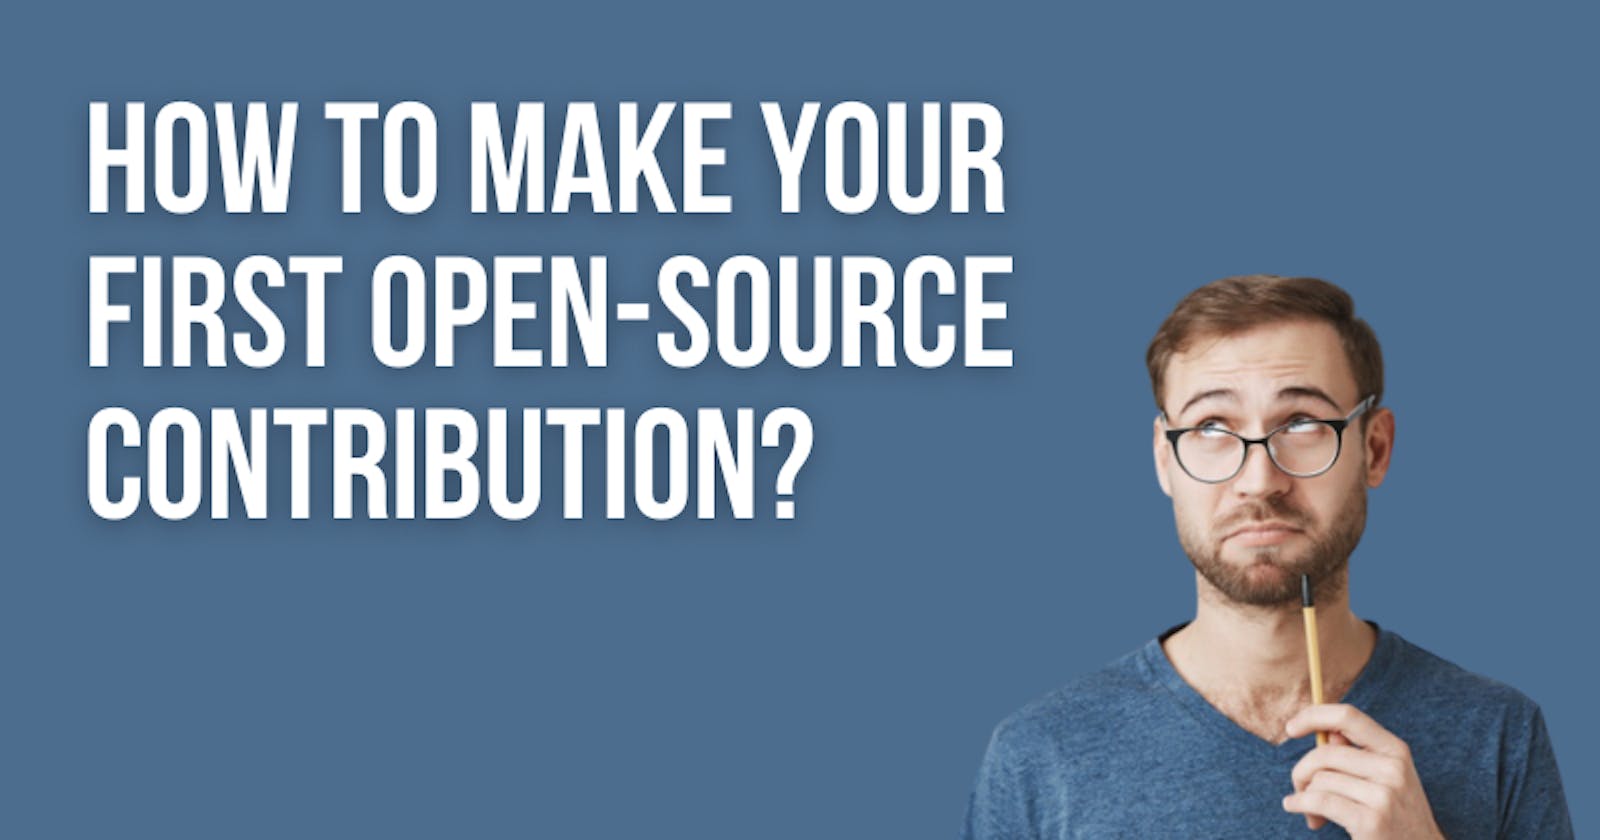 How to make your First Open-Source Contribution?